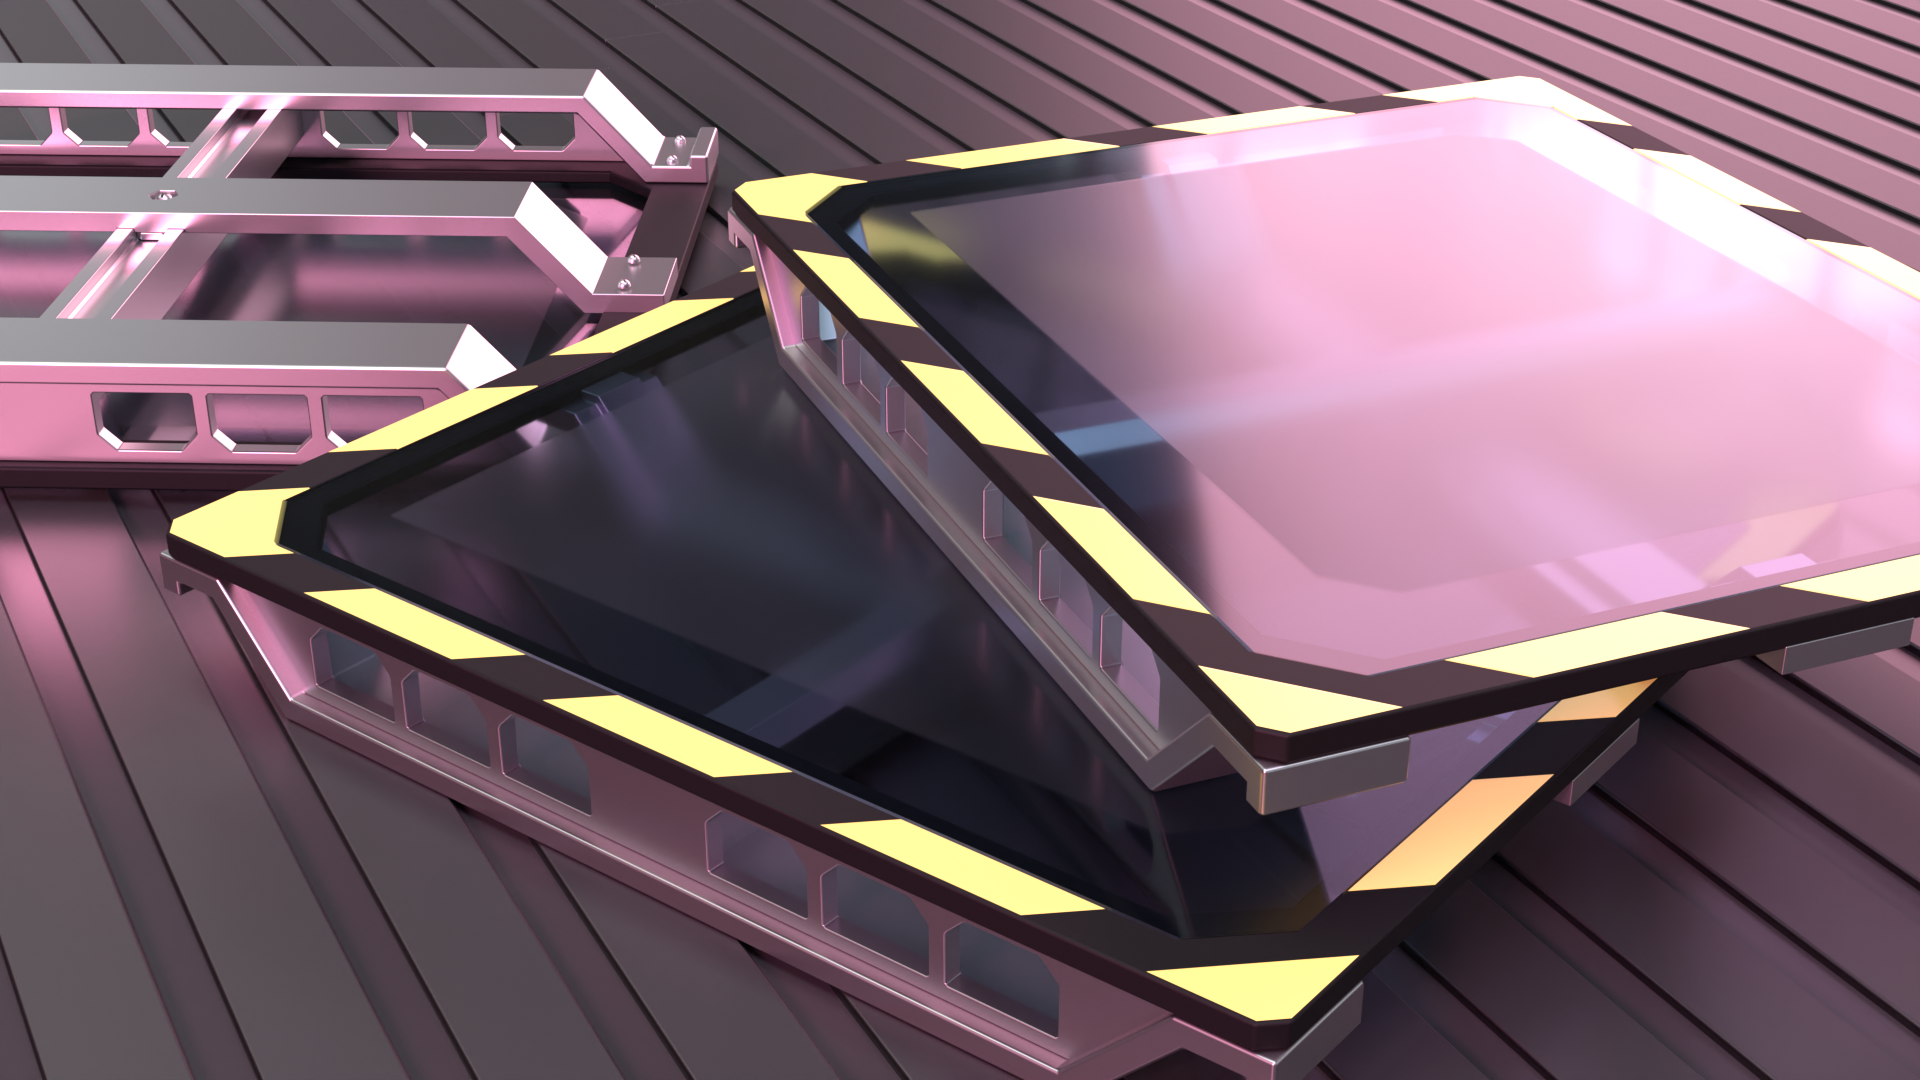 I actually looked up the standard dimensions for an european palette and worked the base mesh from it. The rest was just making sure it looked sci-fi enough.